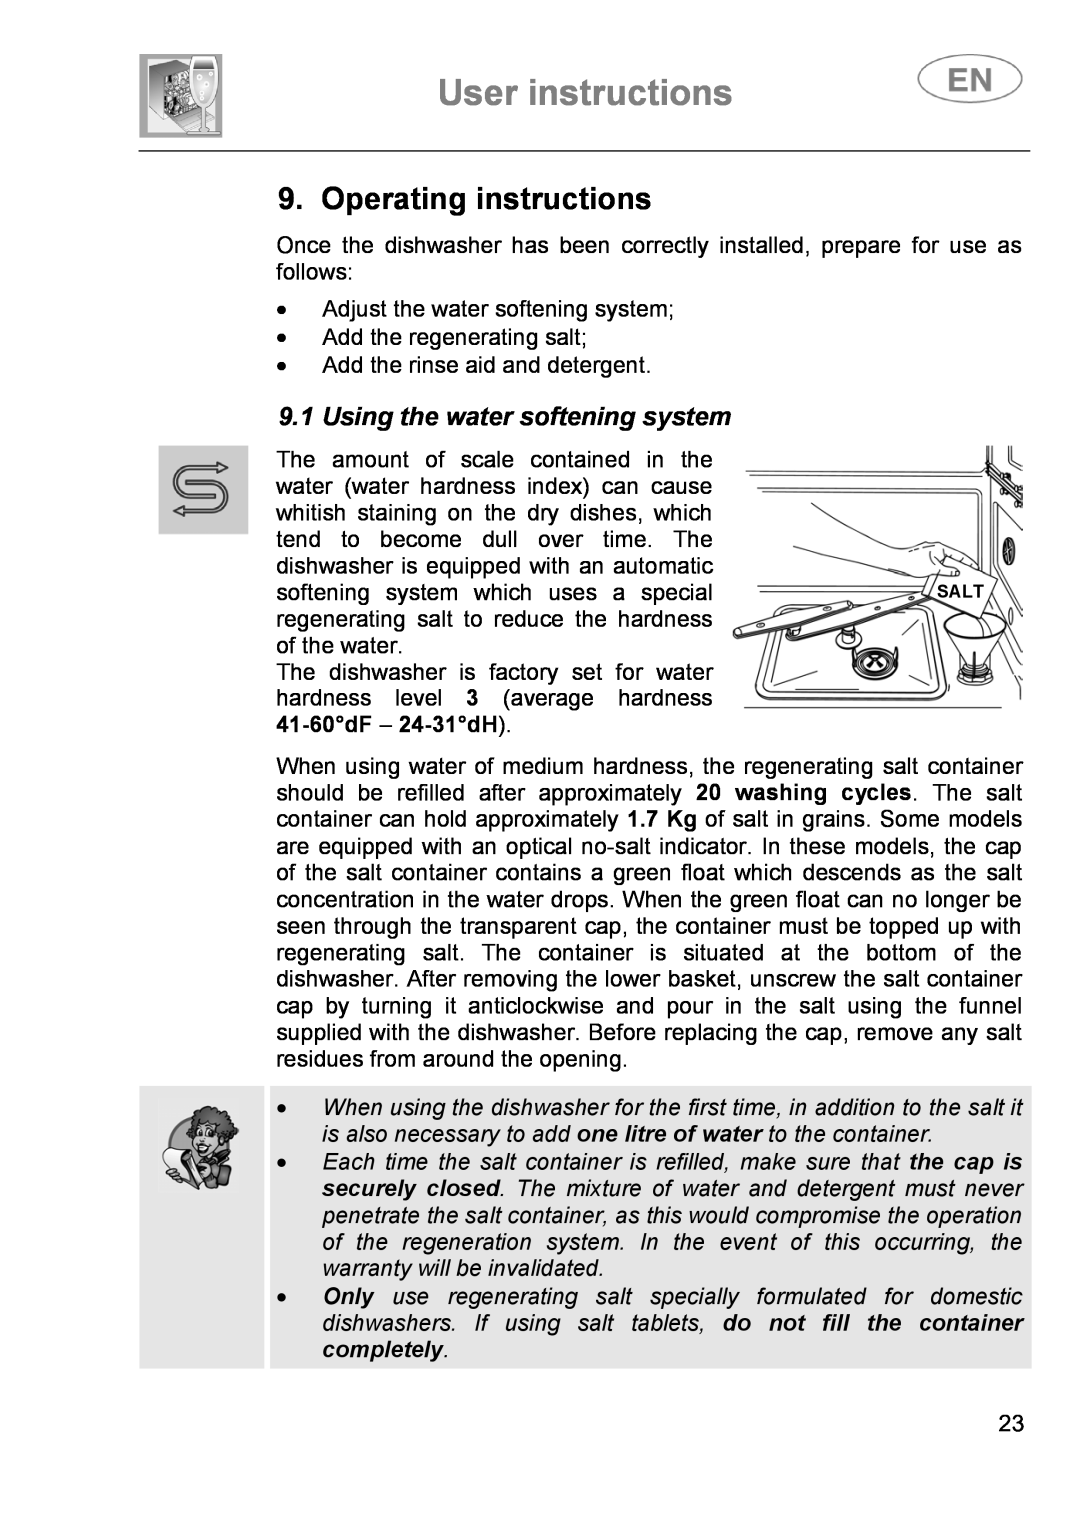 Smeg DI614H instruction manual User instructions, Operating instructions, Using the water softening system 